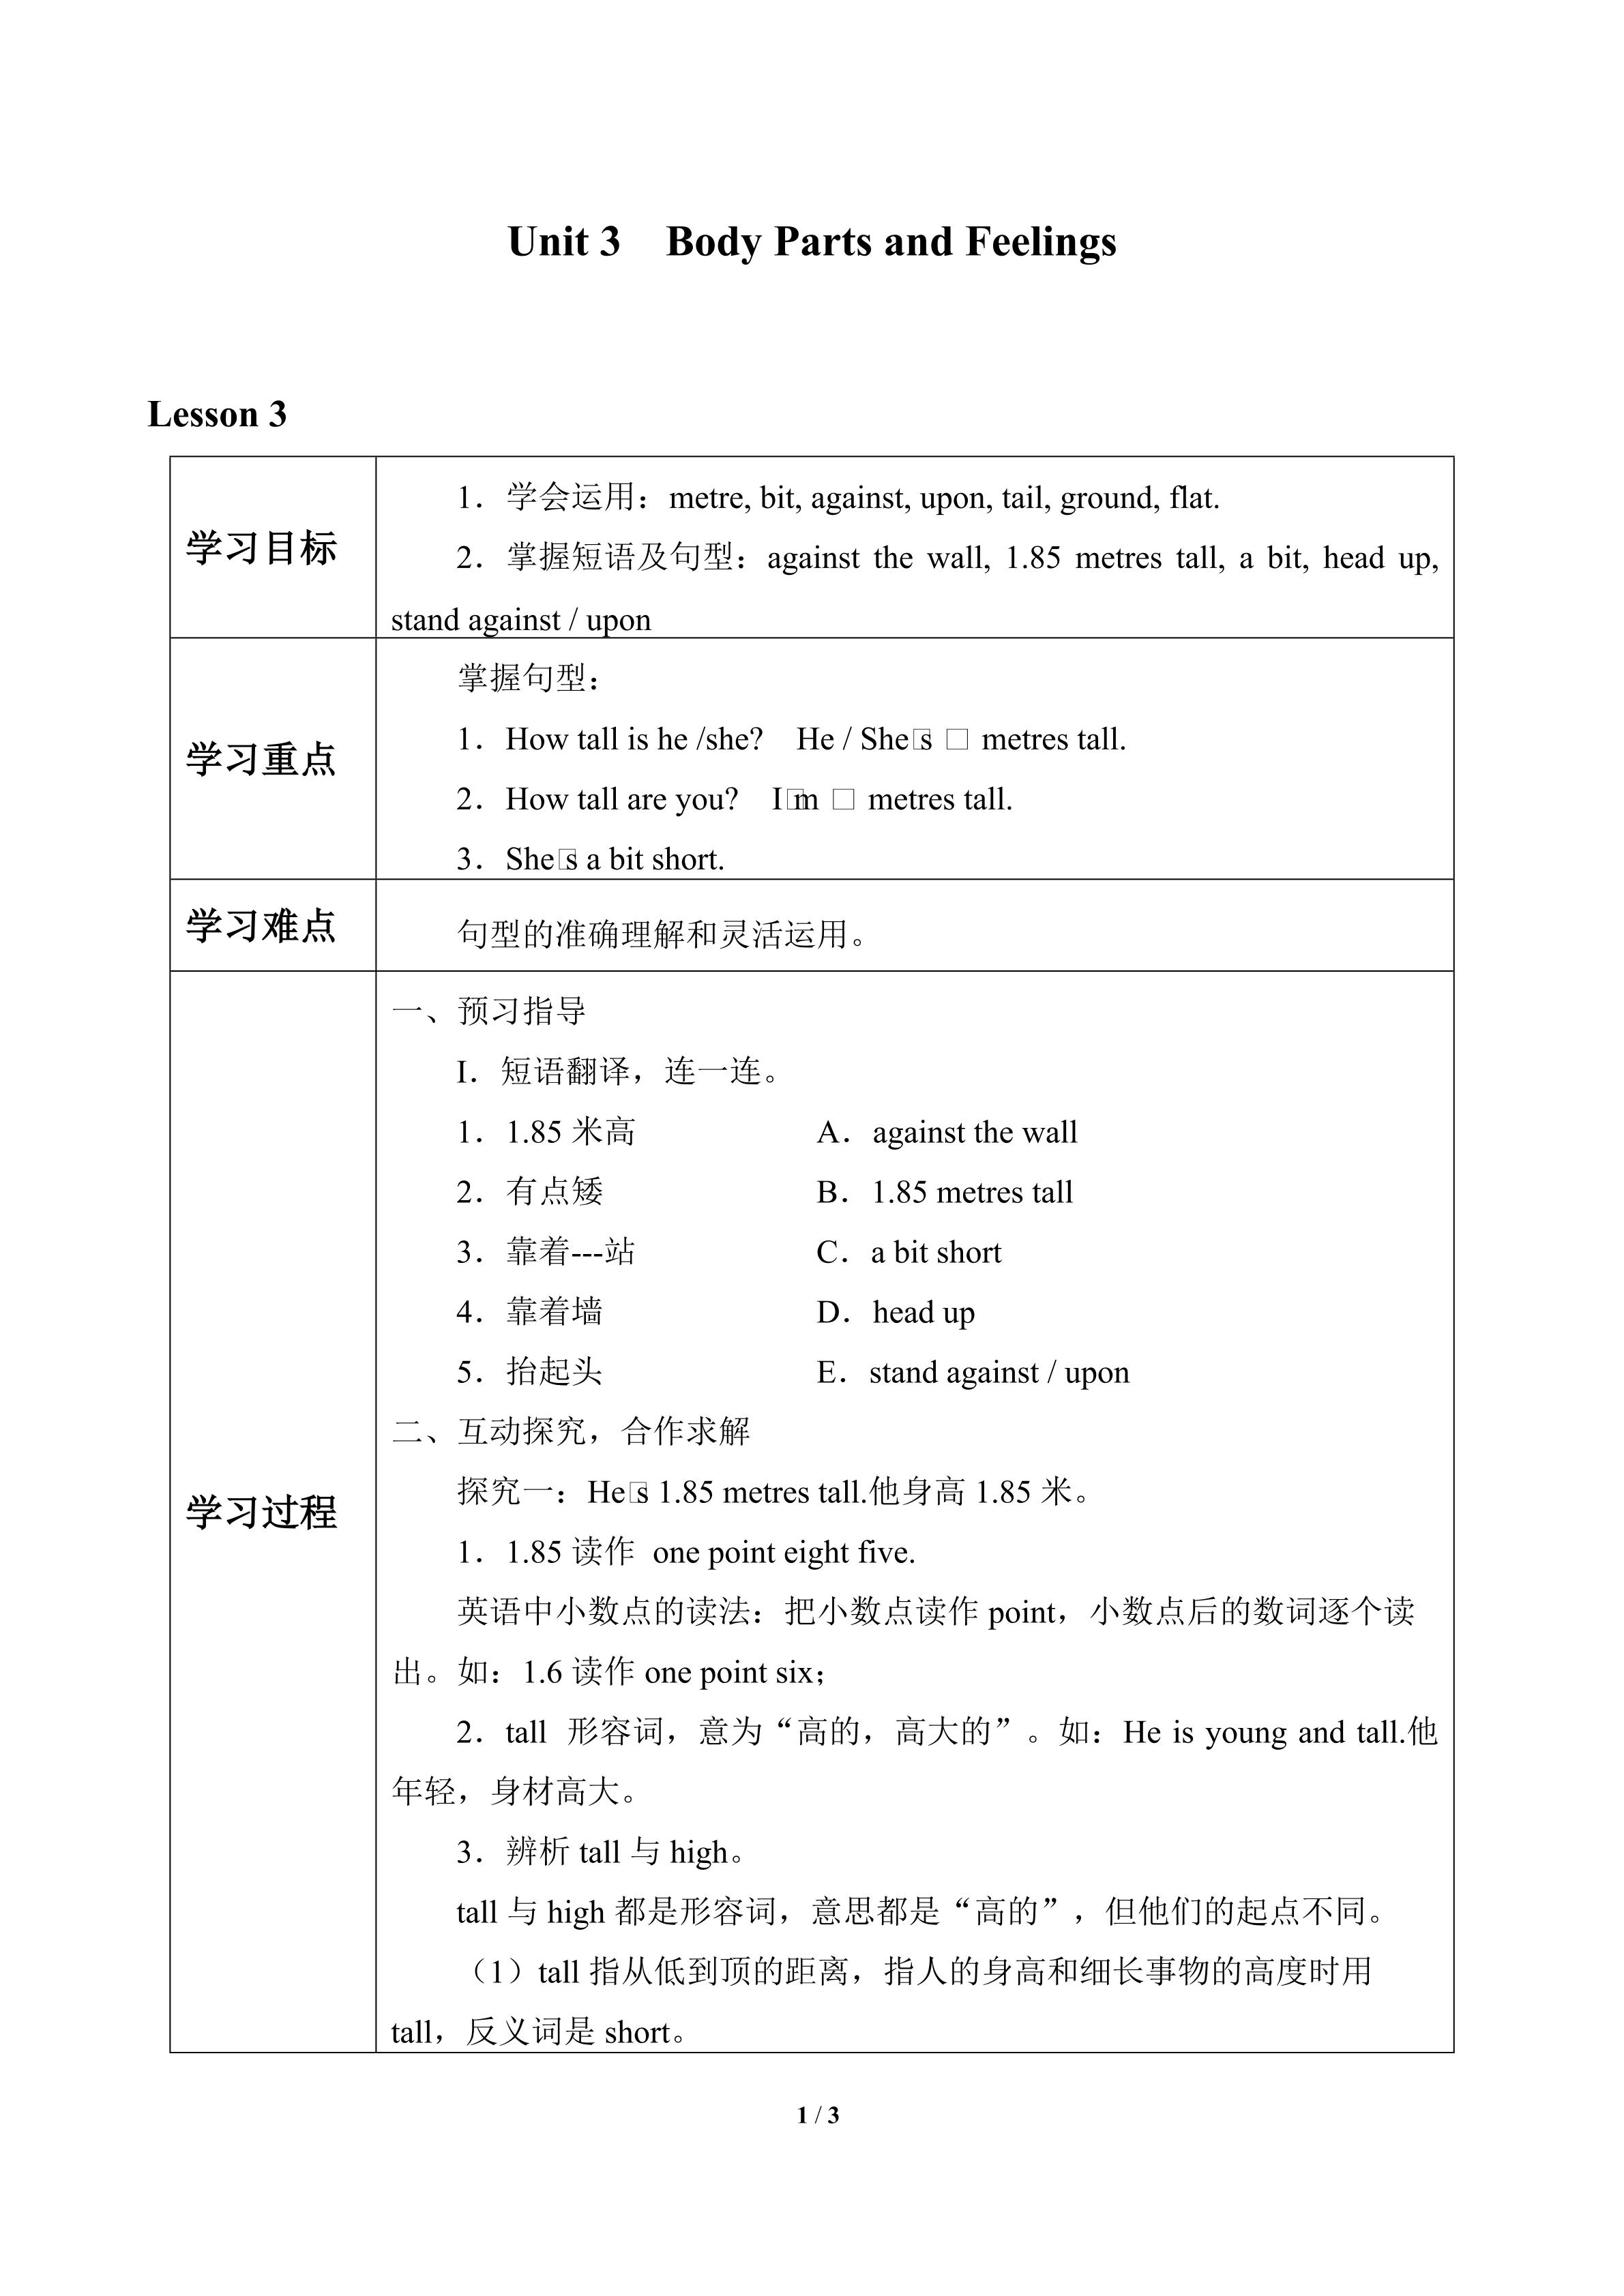 Unit 3  Body Parts and Feelings_学案3